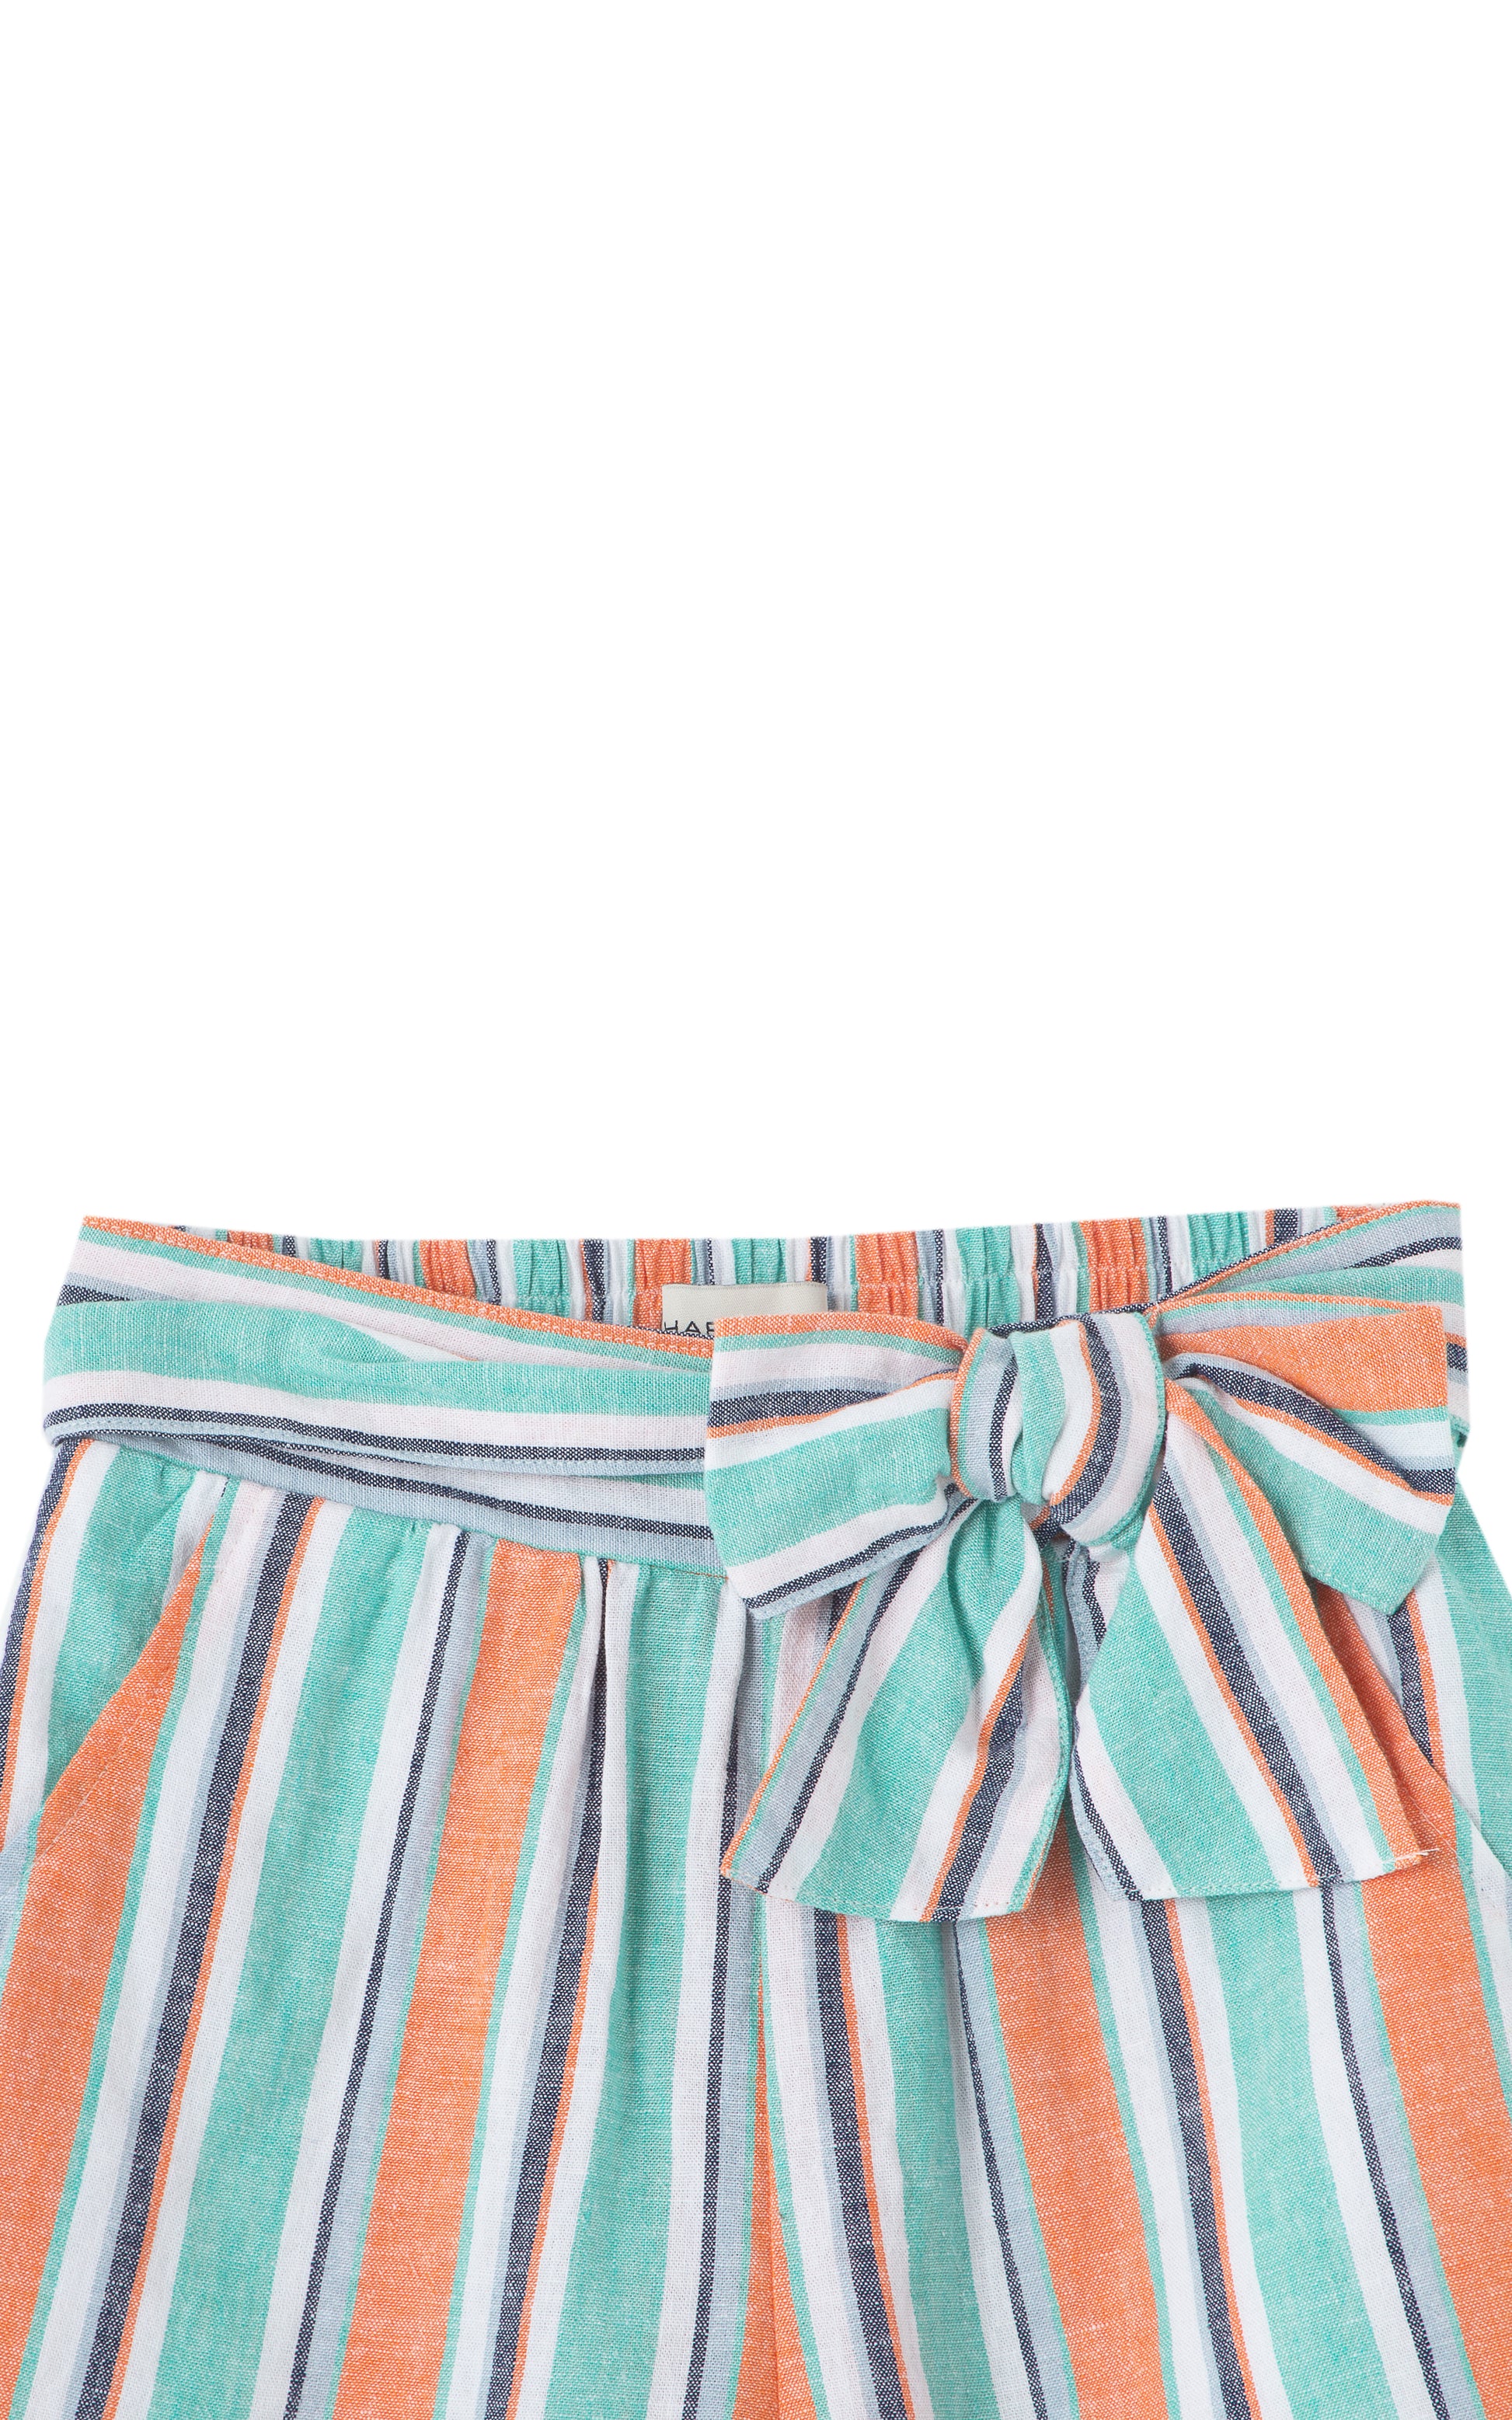 CLOSE UP OF ORANGE-GREEN-WHITE-AND-GREY-STRIPED SHORT WITH BOW